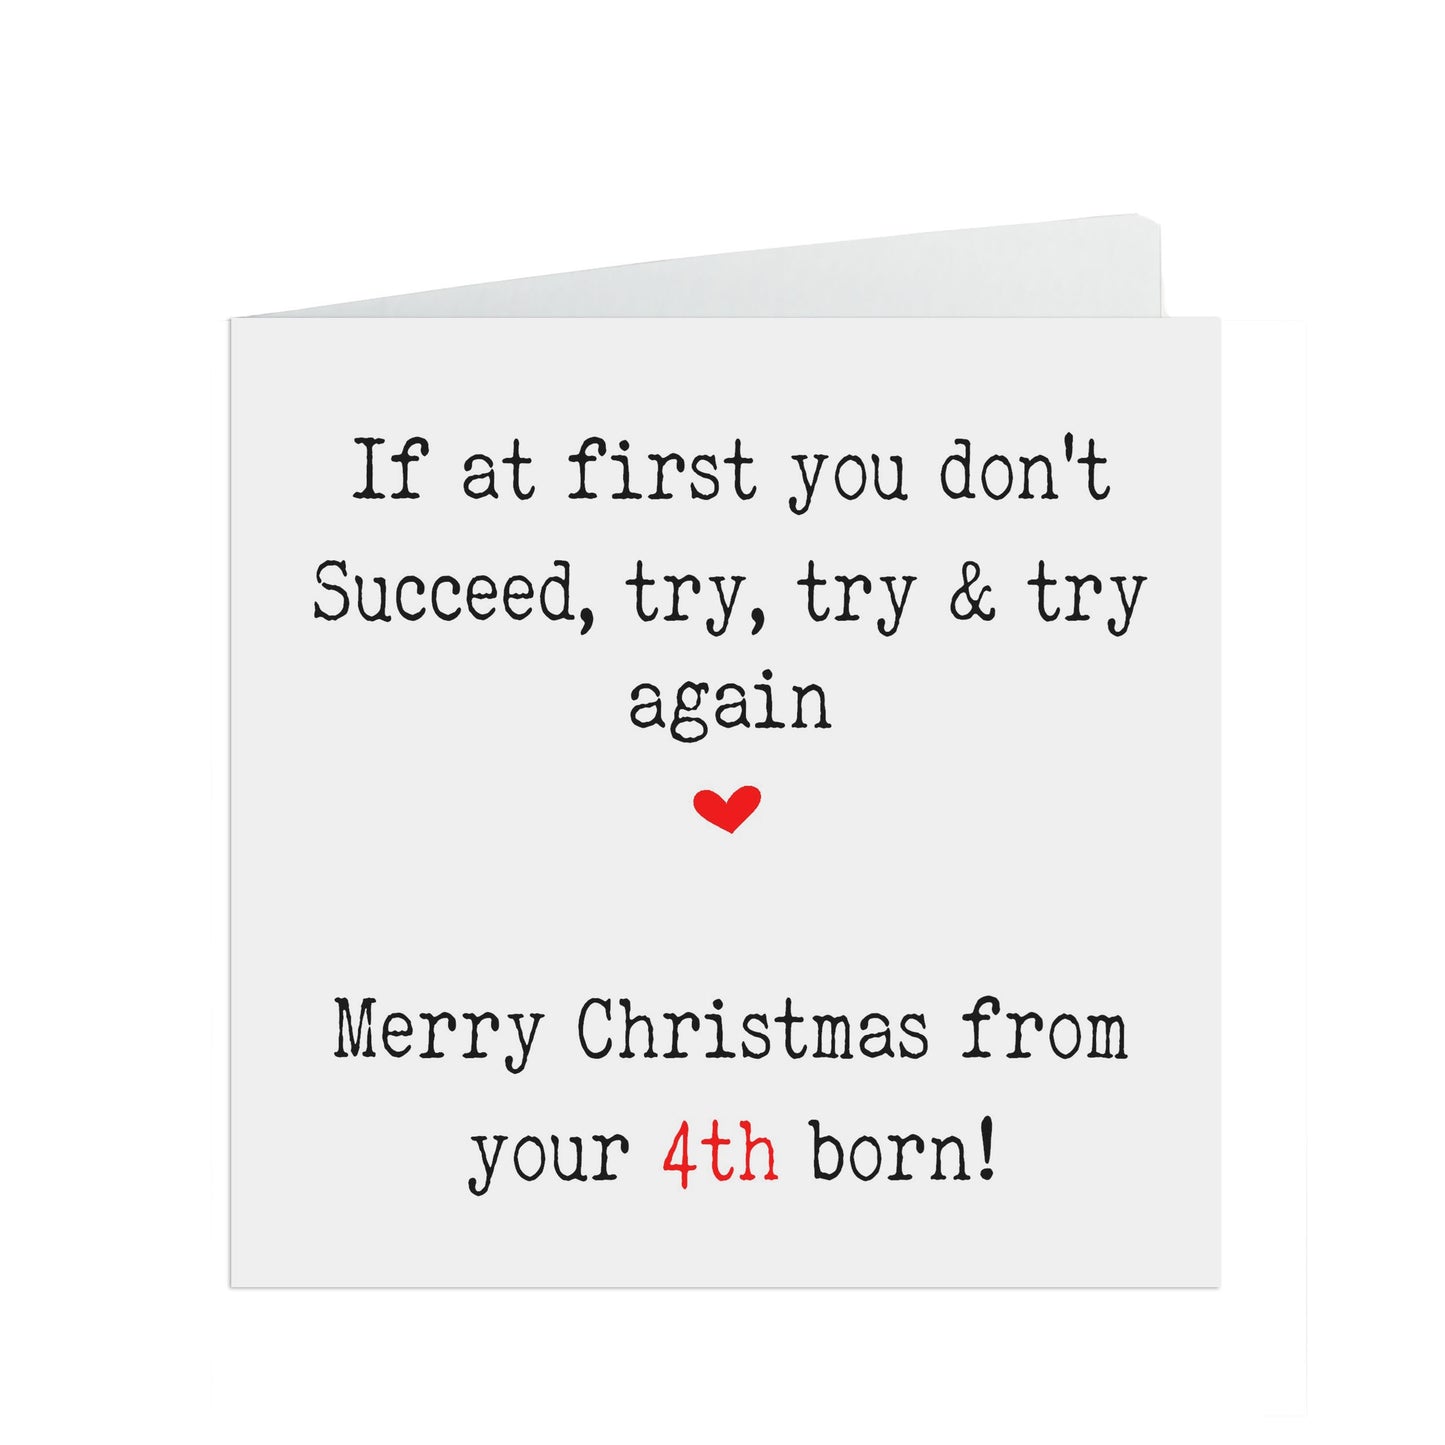 Funny Christmas Card, If At First You Don't Succeed Try Again From Your 4th Born